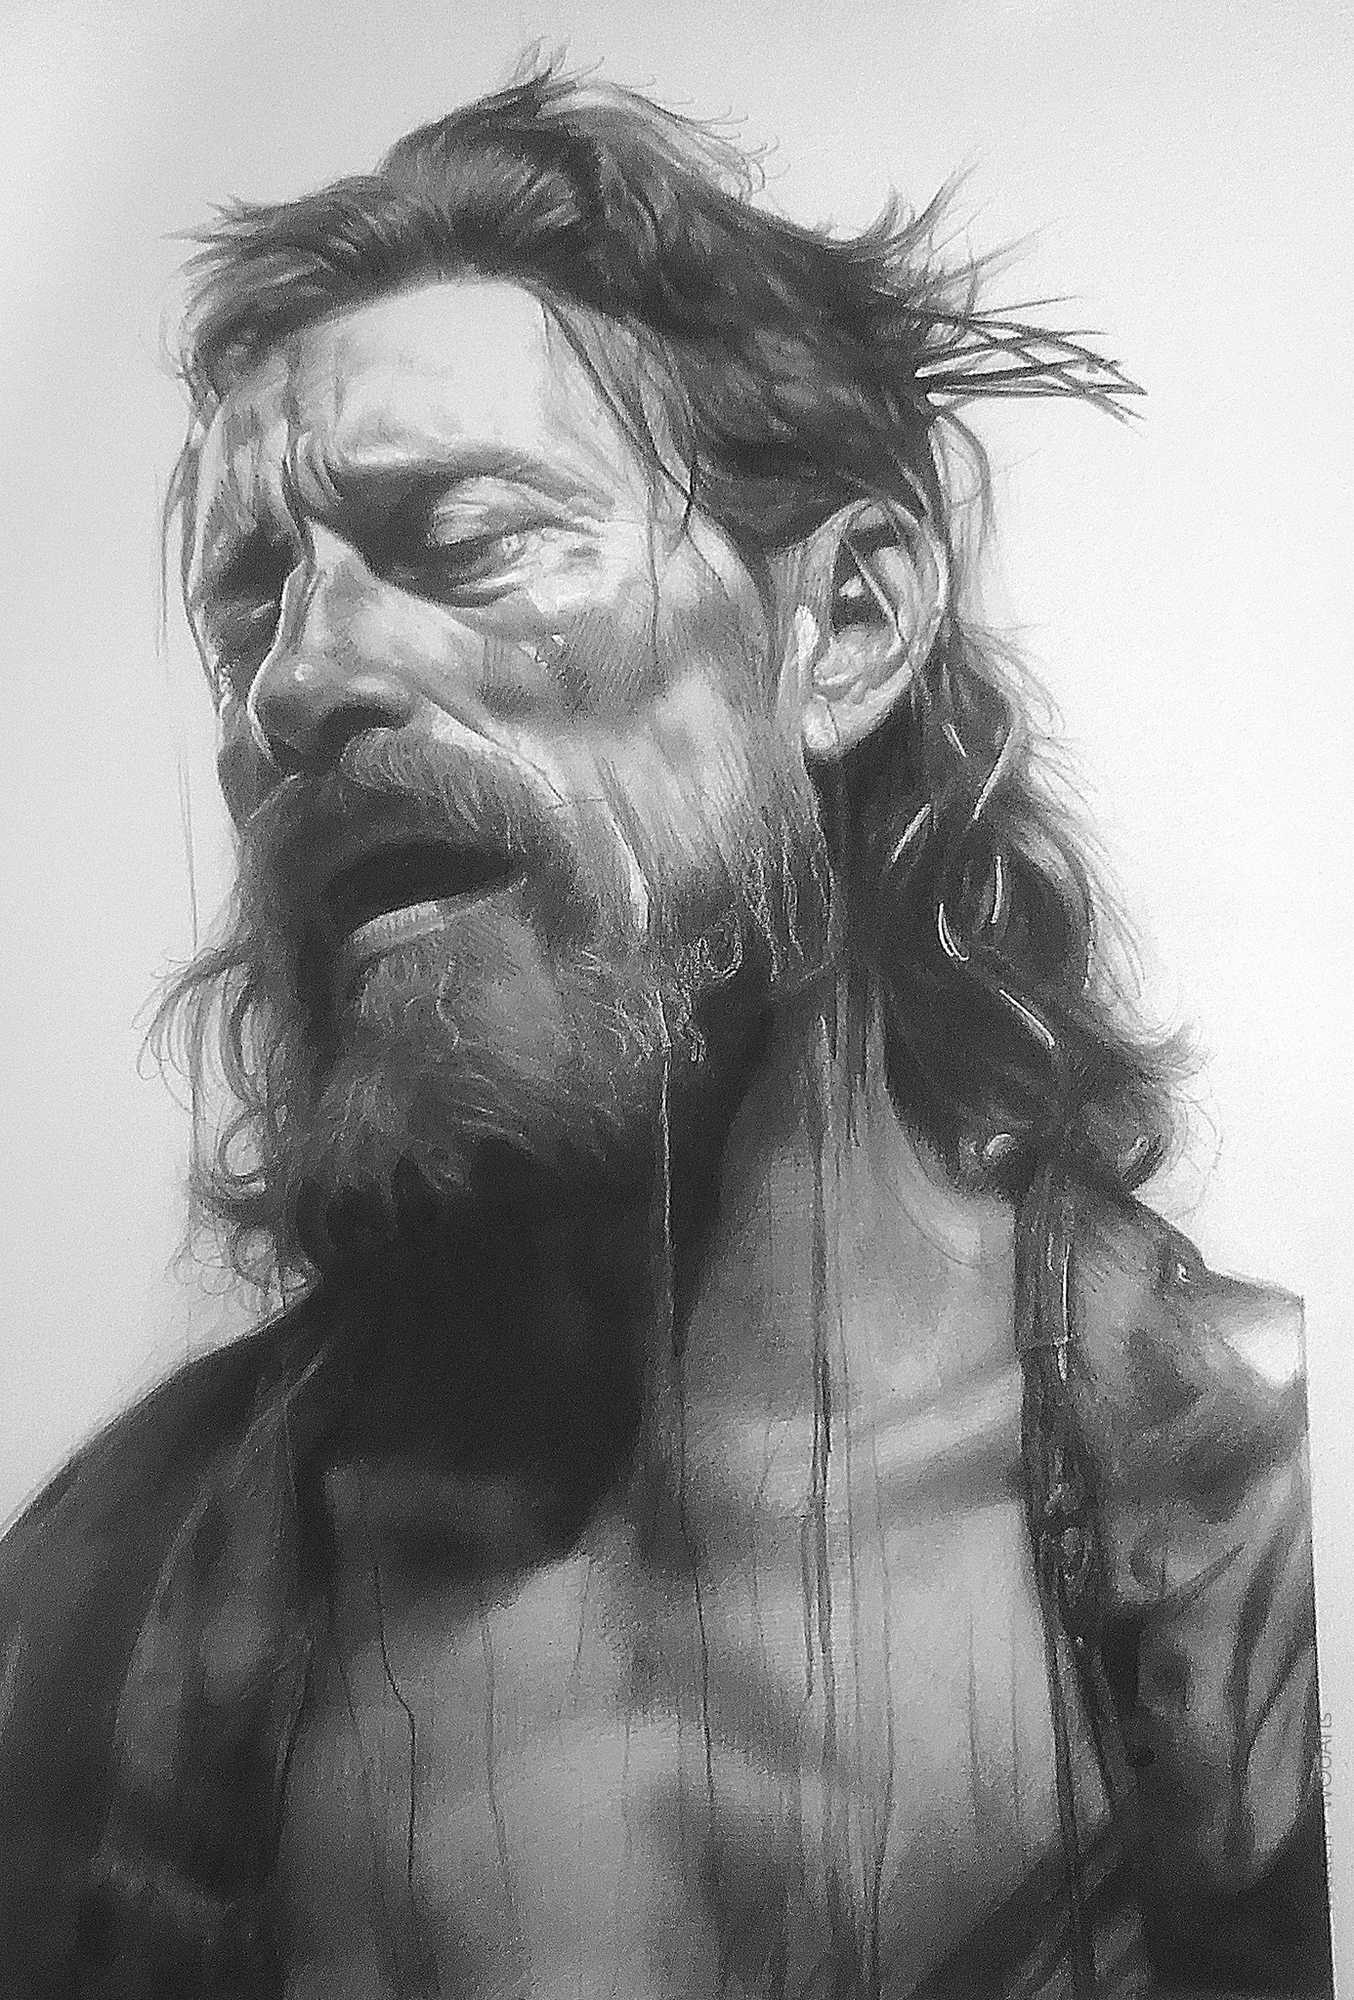 Painting by Paul Cadden